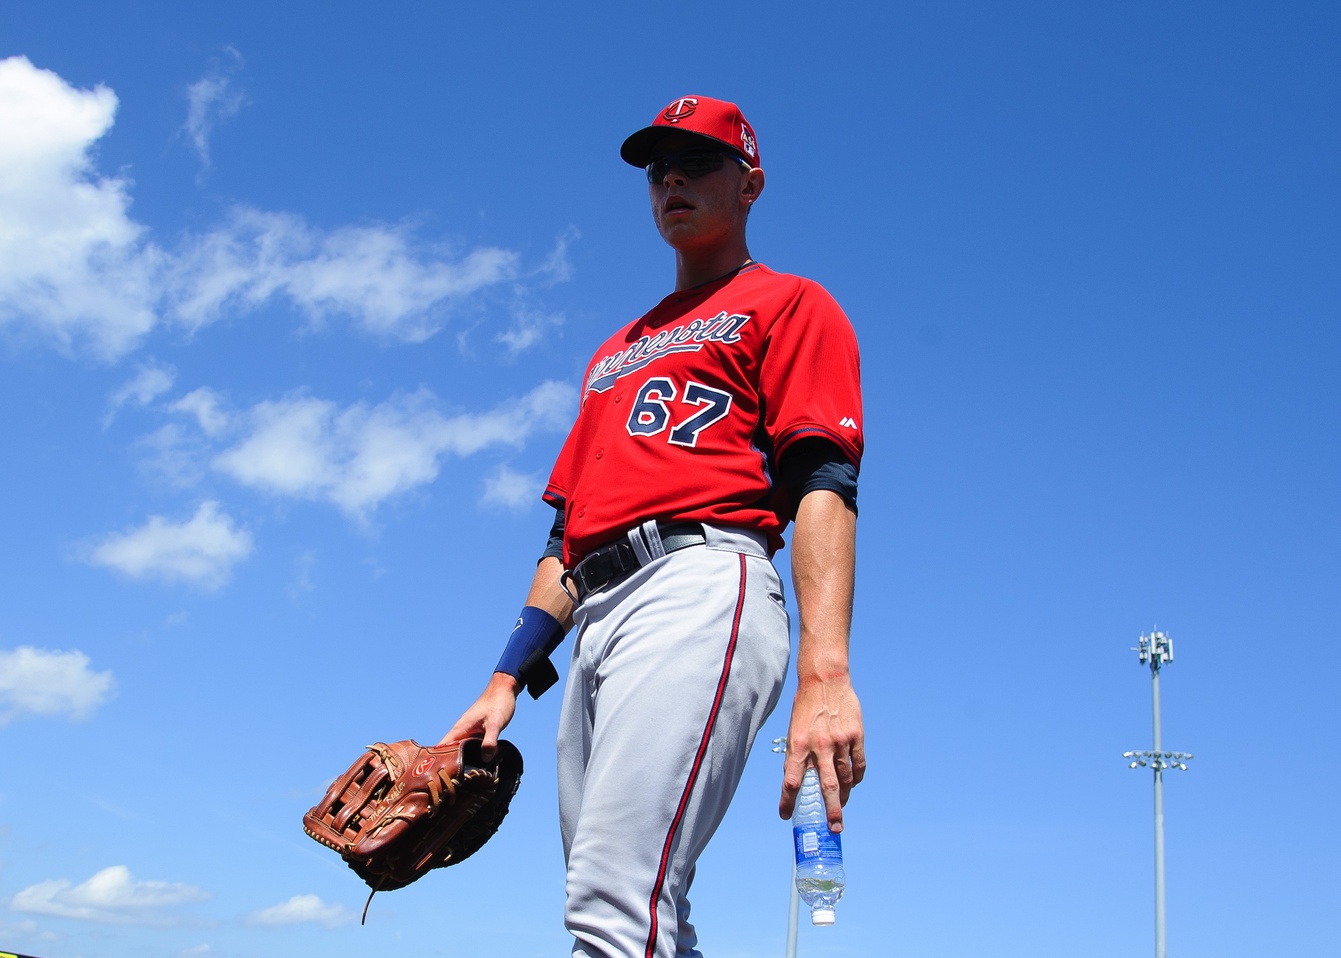 Berlin-born Max Kepler enjoying early success with Chattanooga Lookouts